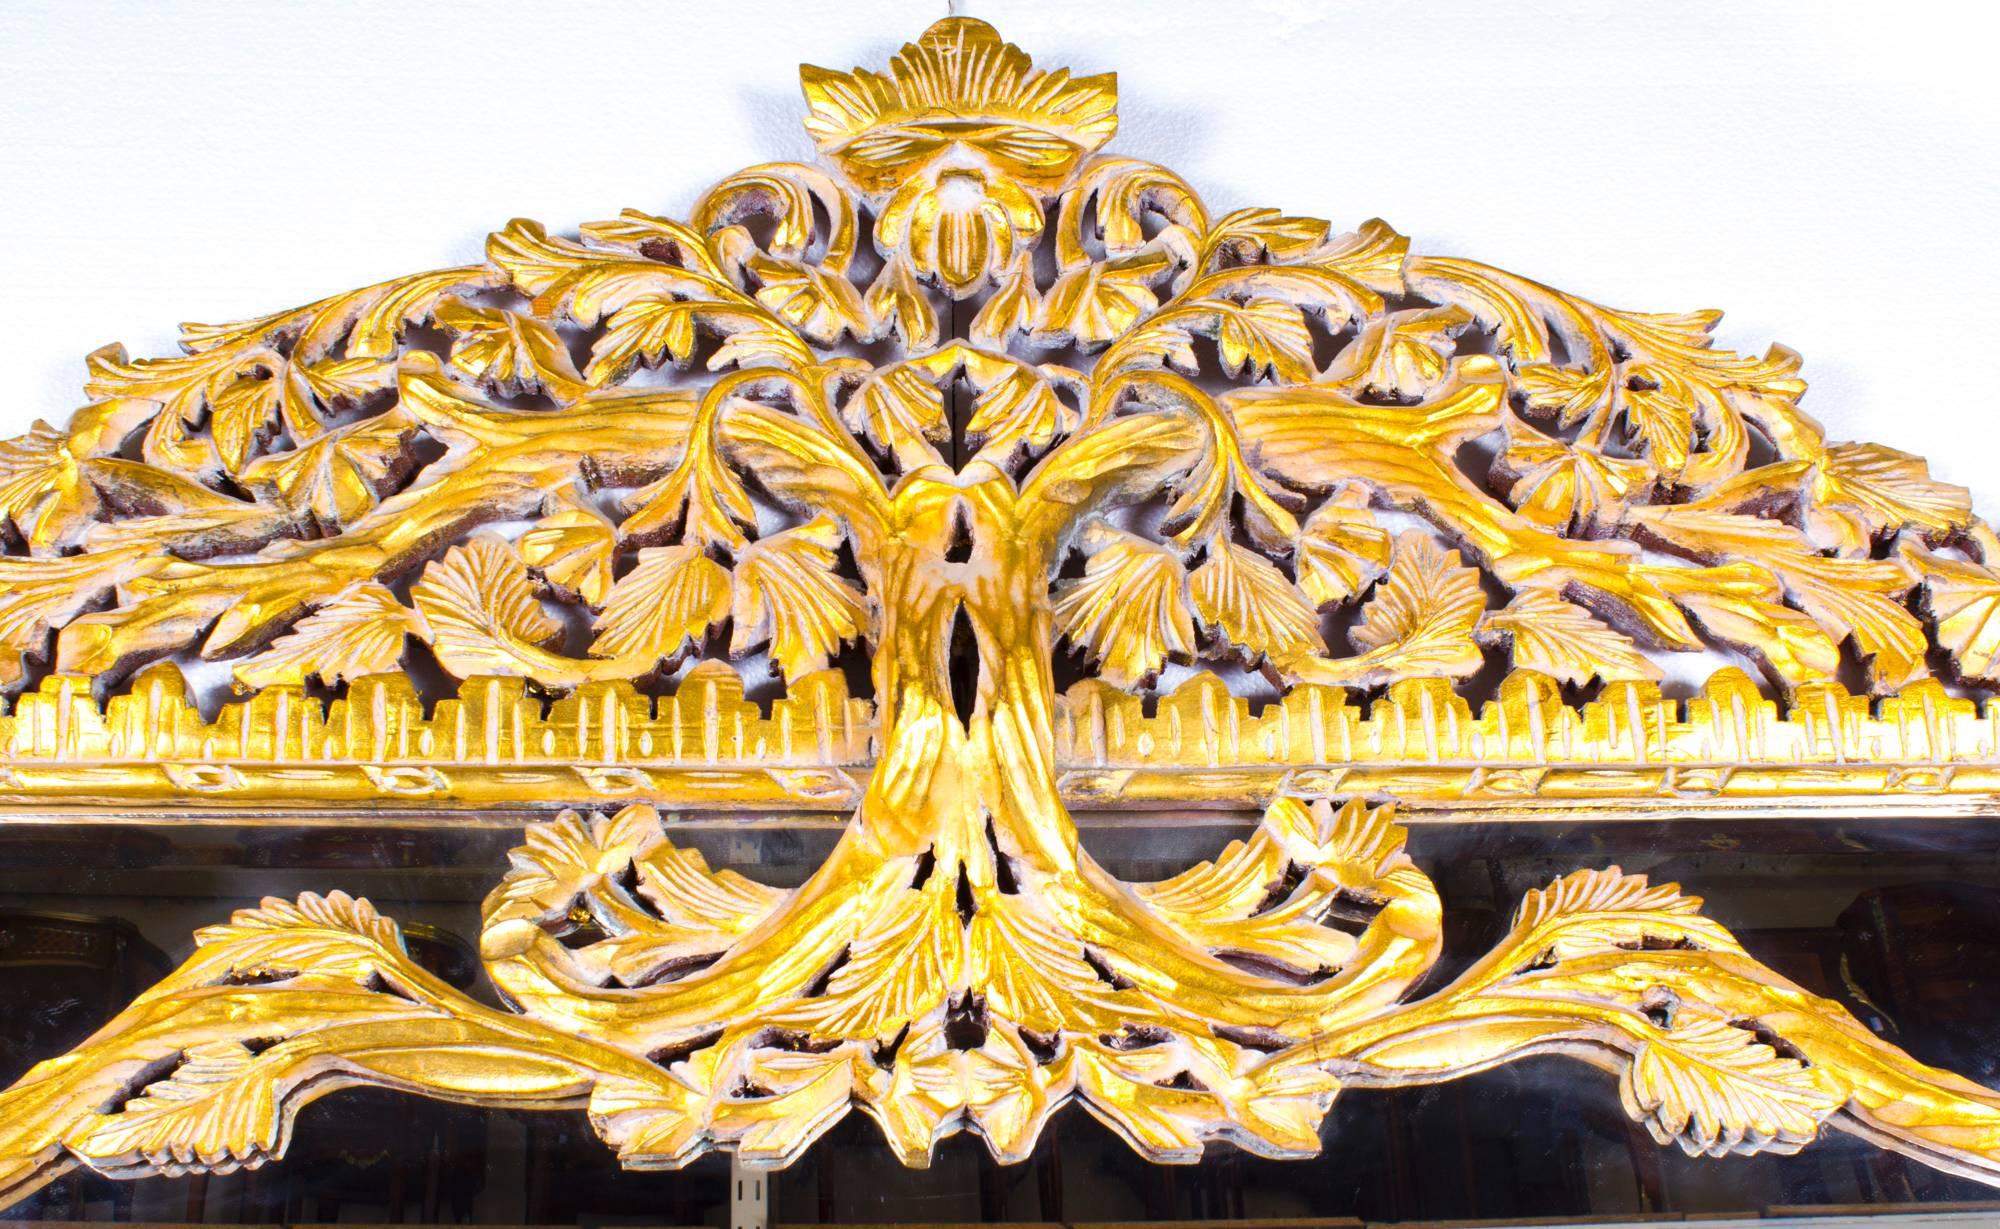 This is a beautiful and highly decorative large Italian rectangular giltwood mirror with foliate trailing vine hand carved and gilded decoration, dating from the second half of the 20th century.

With superb hand carved gilt wood and bevelled